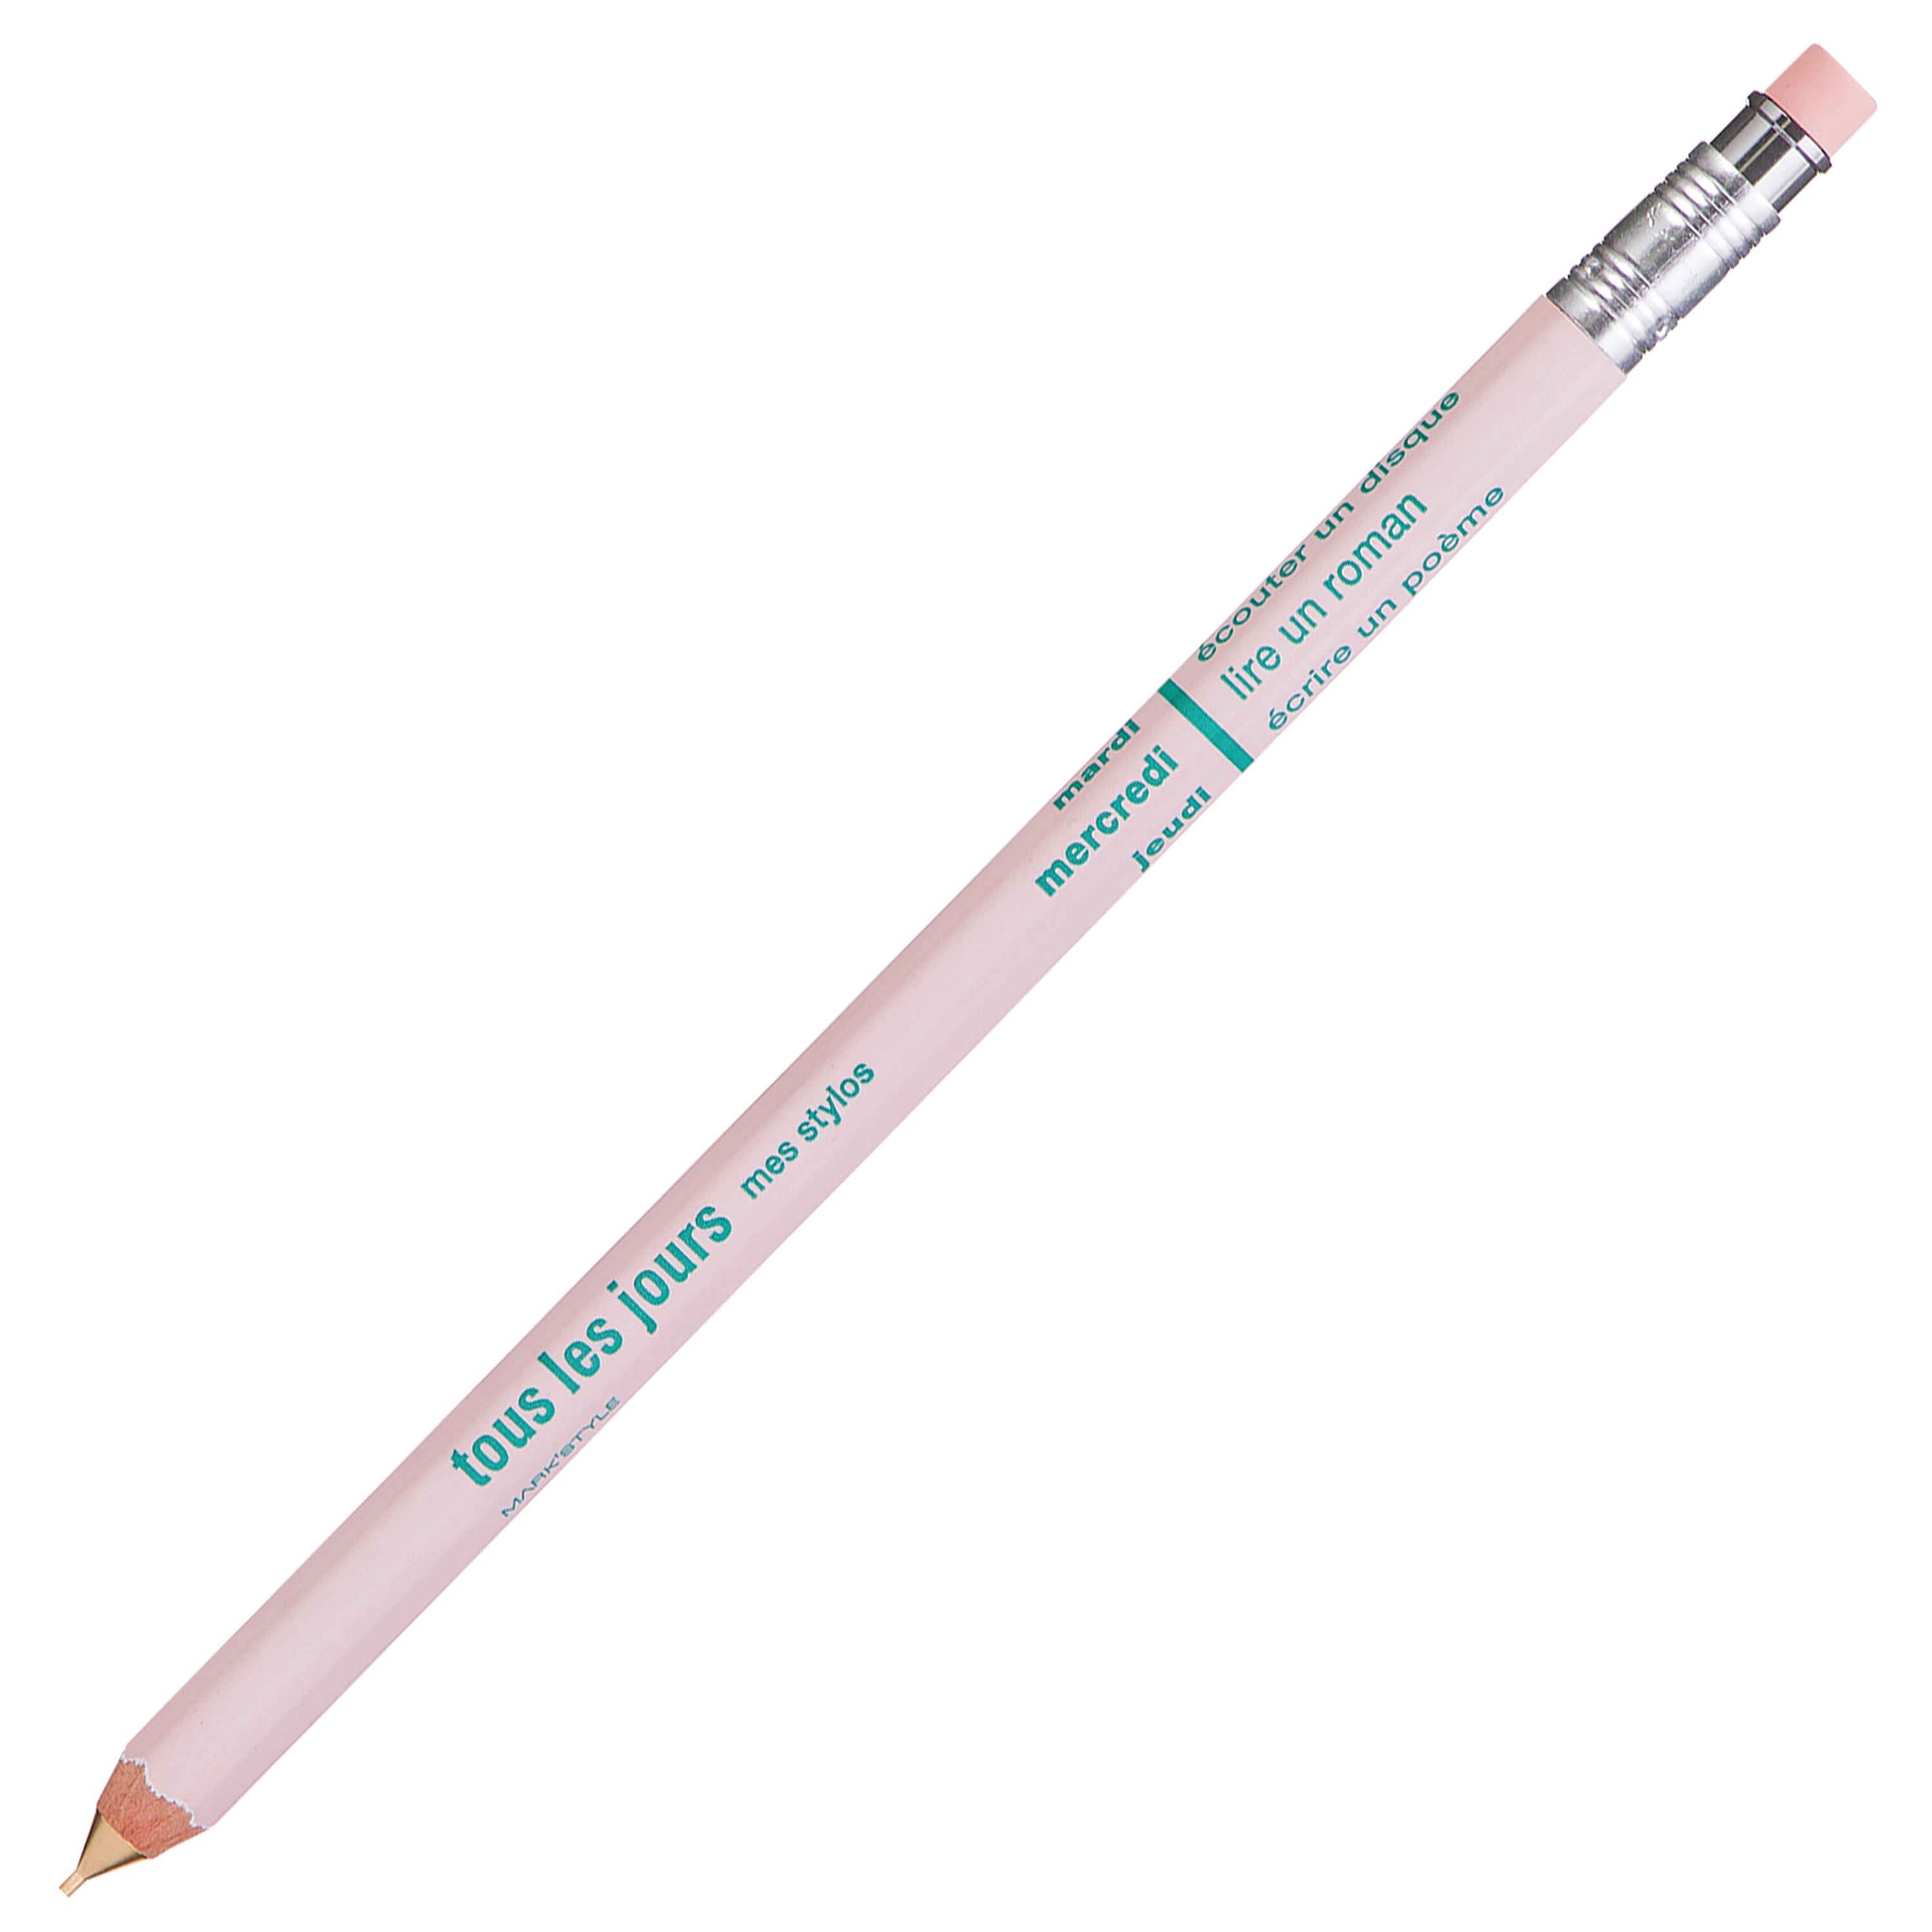 DAY Mechanical Pencil with Eraser / Light Pink